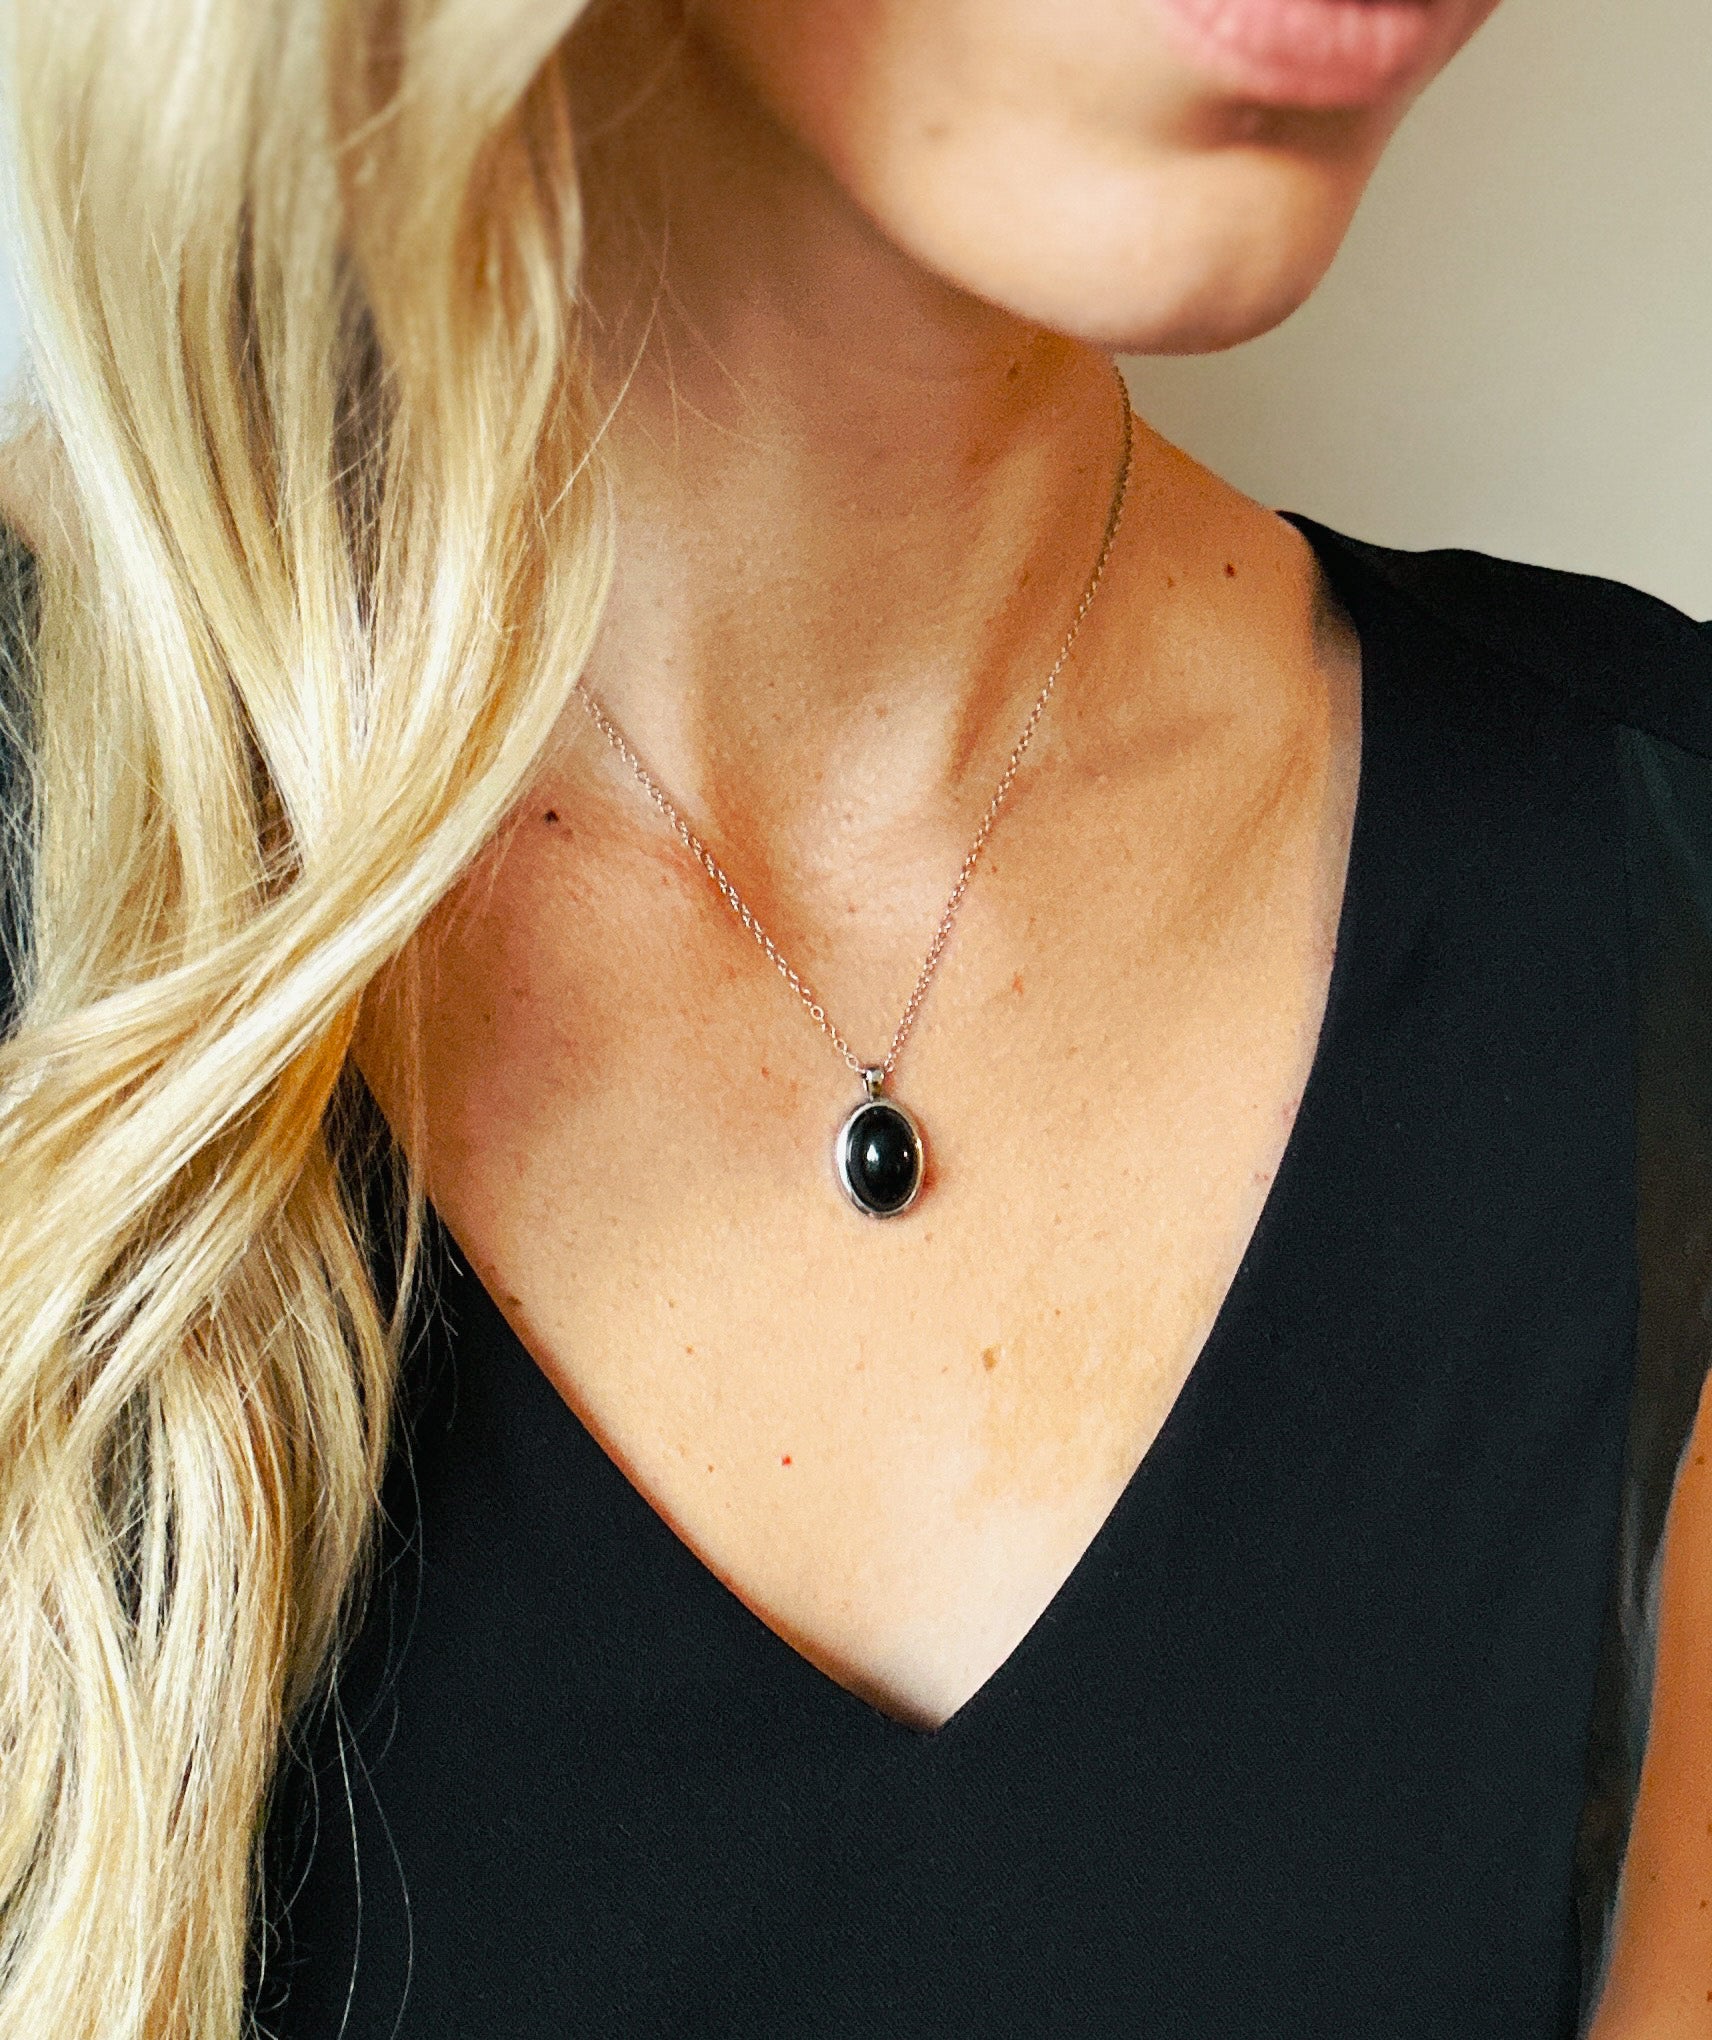 Sterling silver necklace with an Onyx Pendant for energy protection